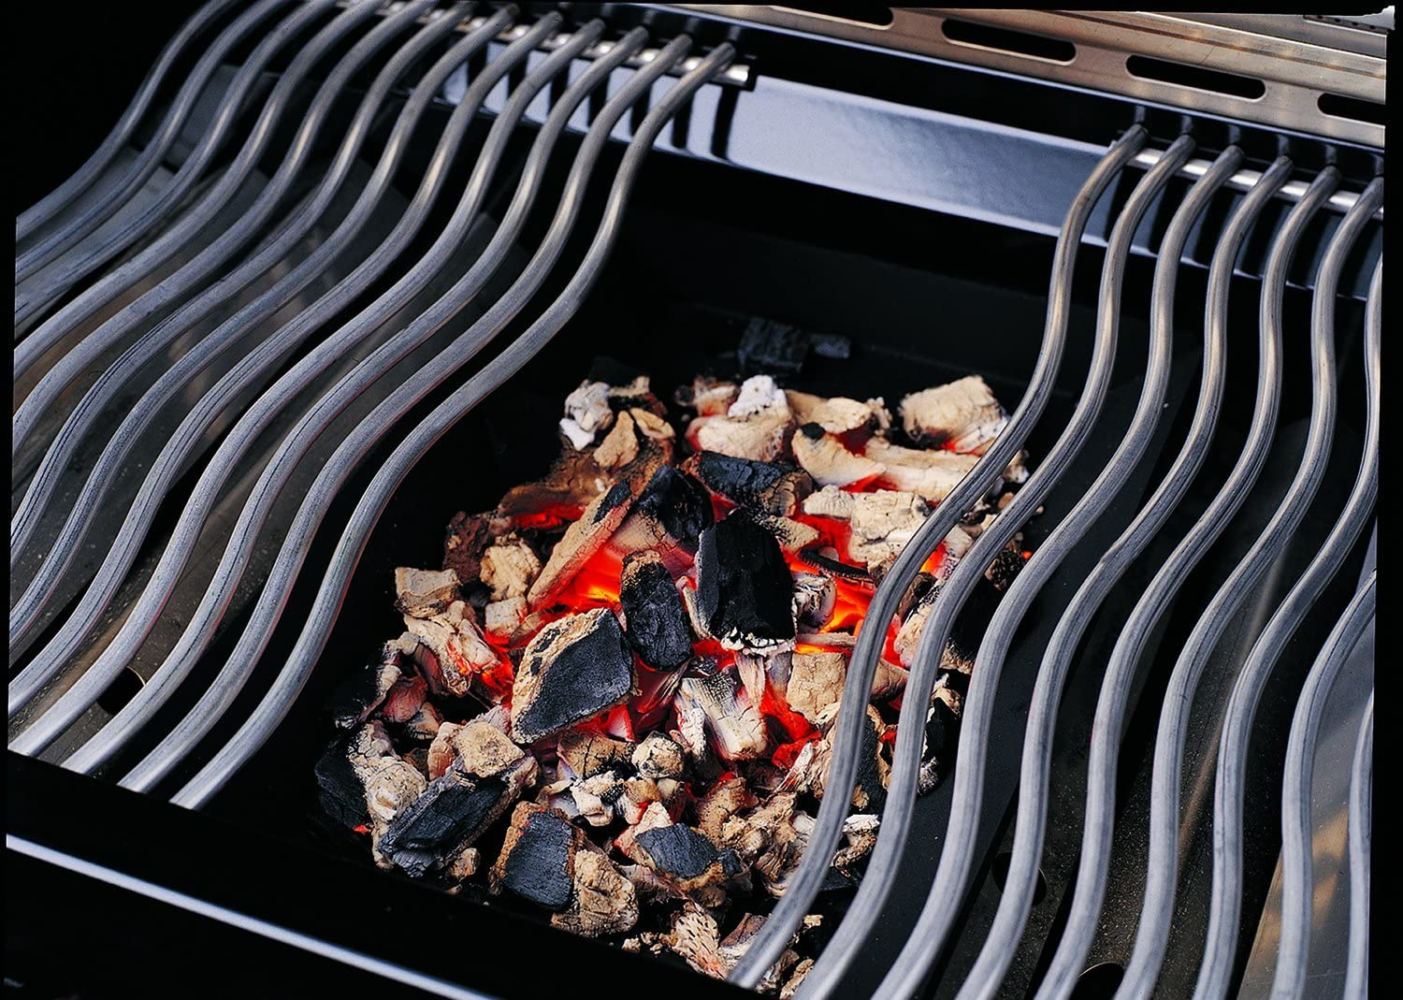 Can I use charcoal gas grill? Find out how!